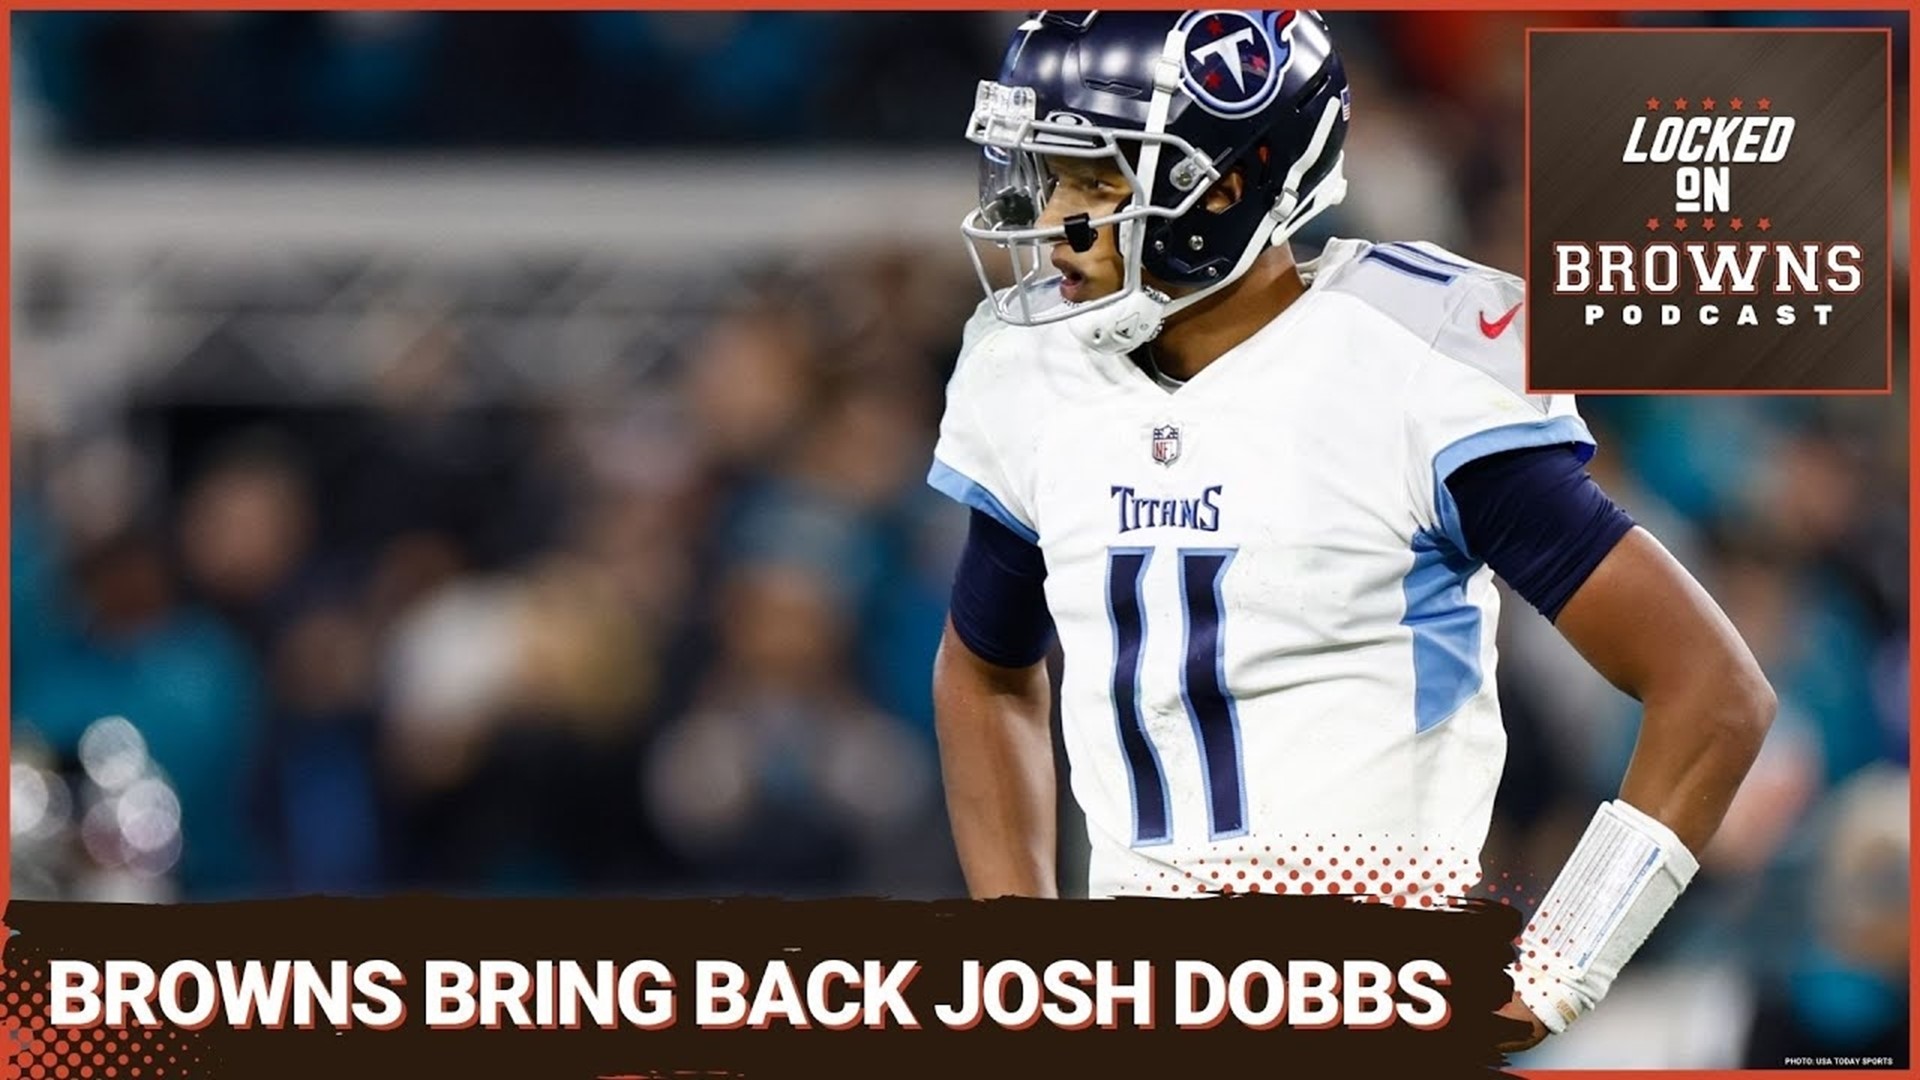 In this video, we'll discuss the latest news surrounding the Cleveland Browns and their backup quarterback position. Is Josh Dobbs the favorite to win the backup job